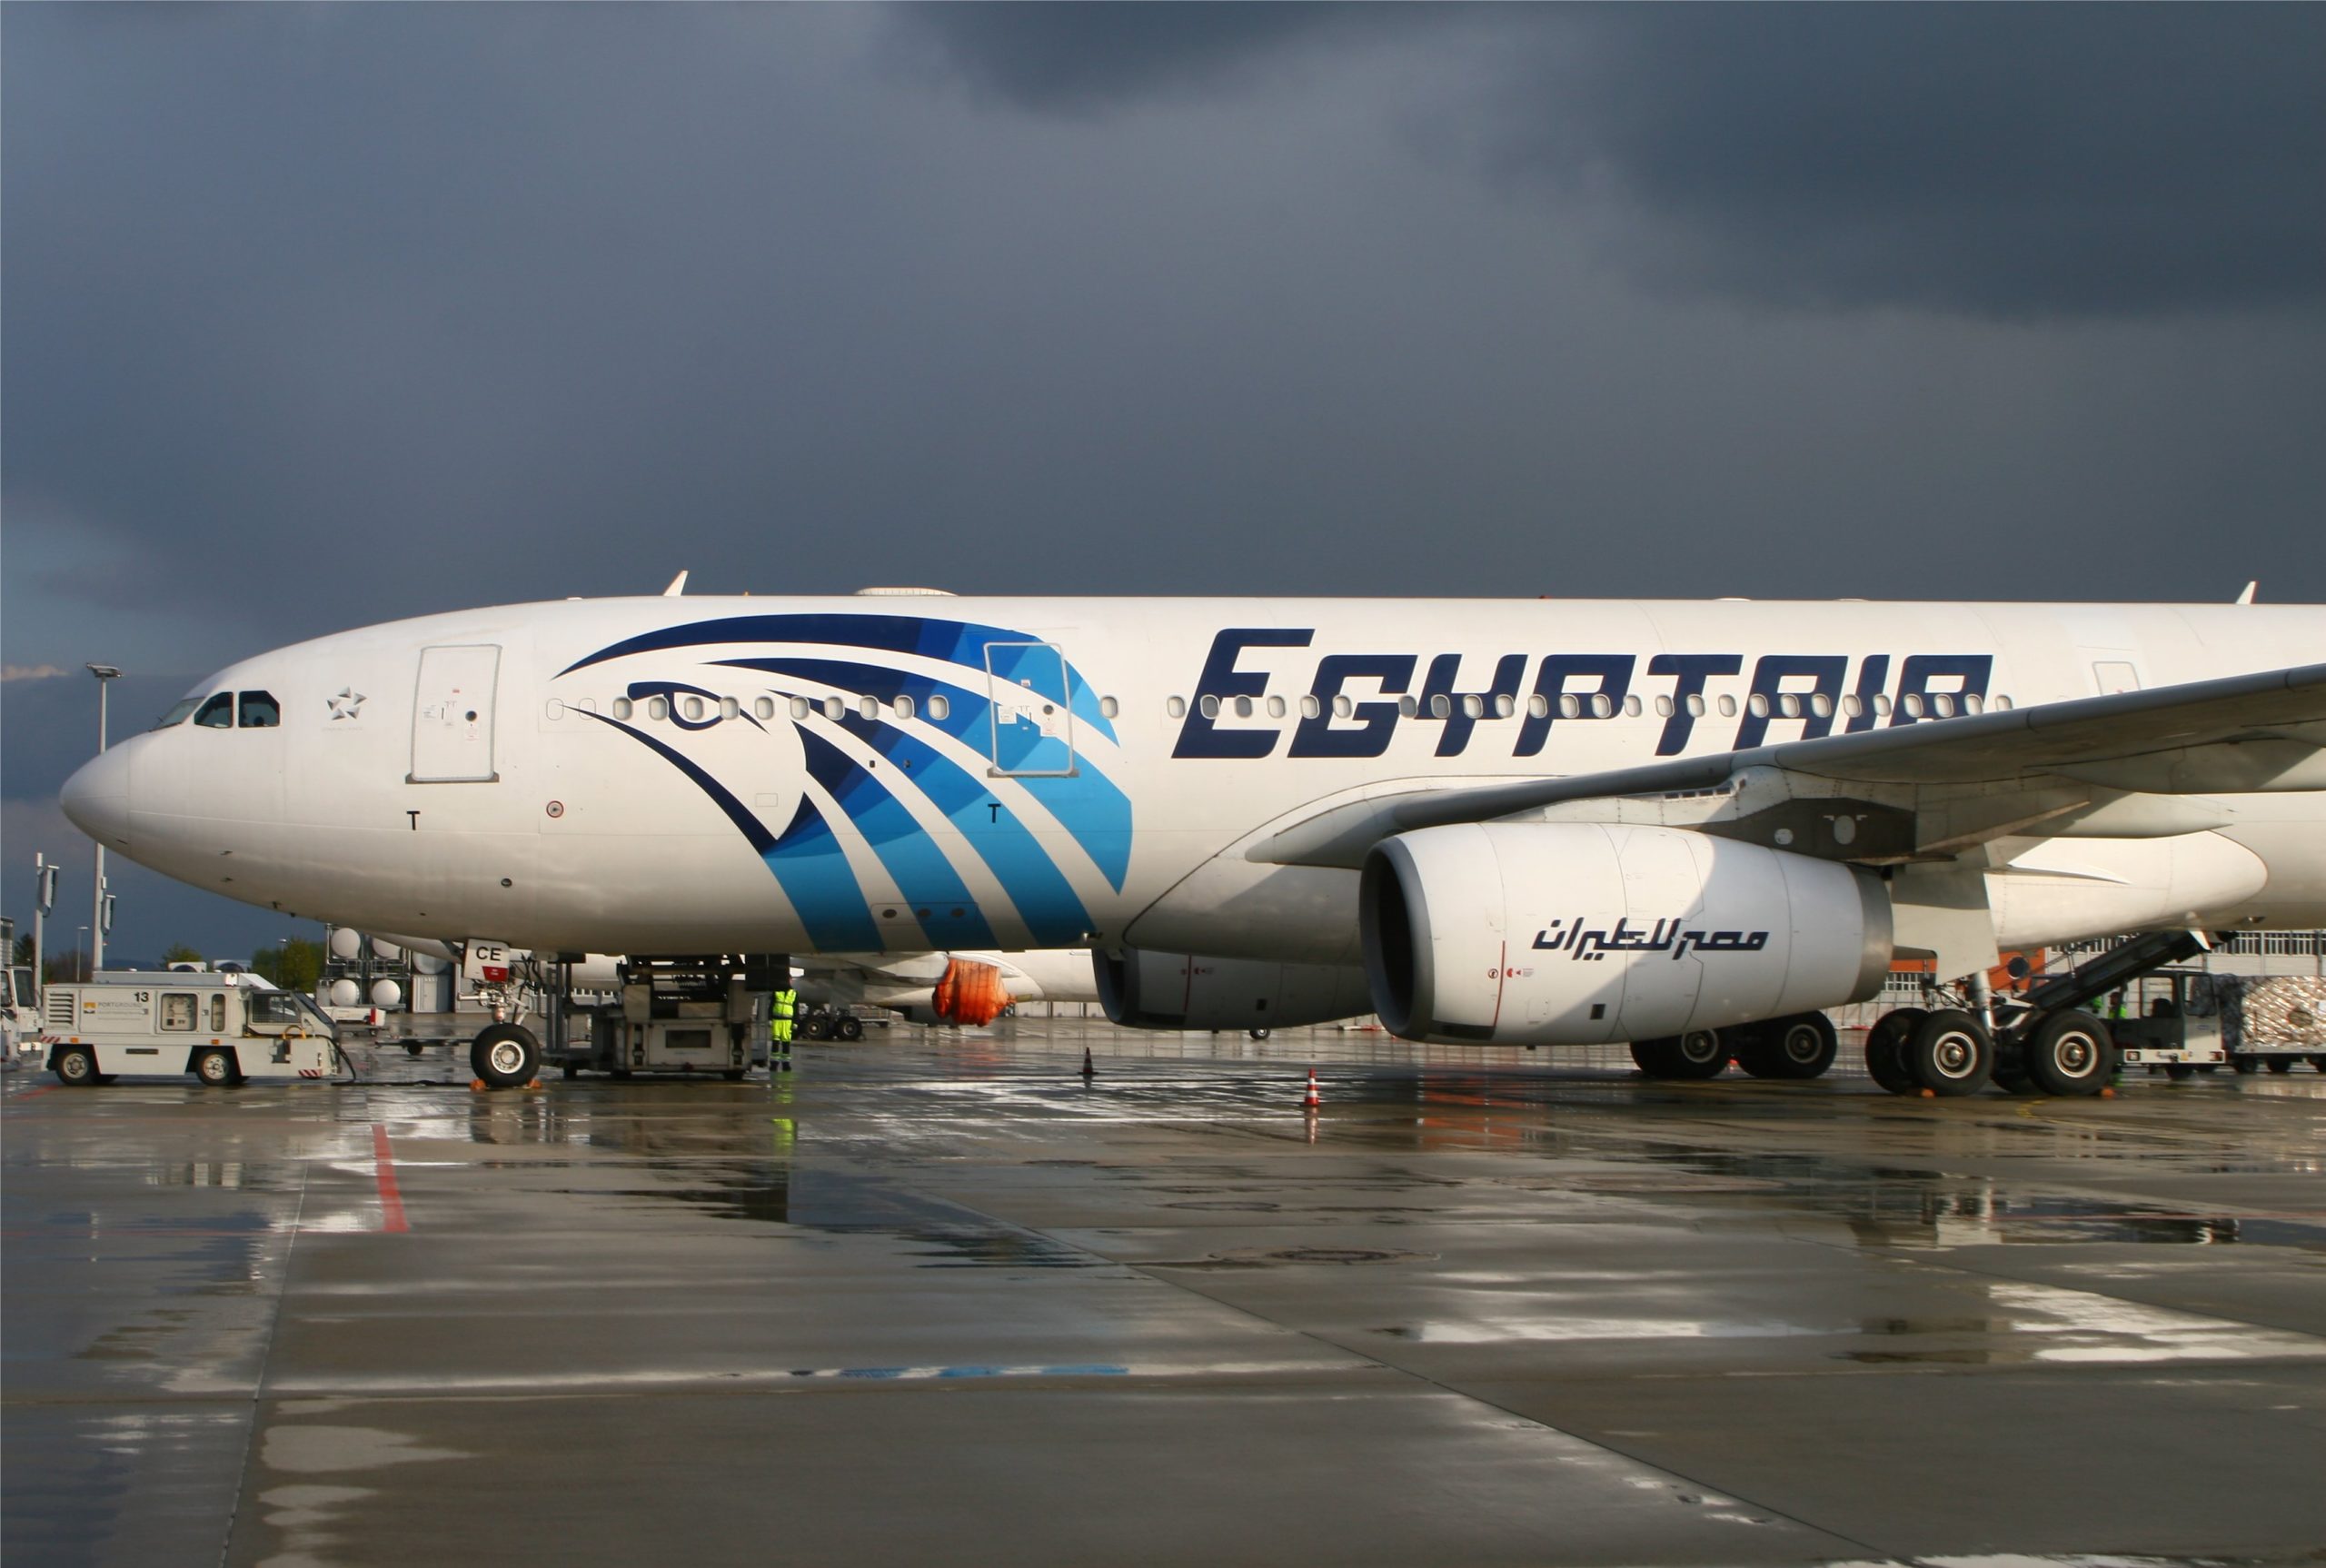 EgyptAir's currently has a third A330-200 undergoing conversion to freighter configuration at EFW's Dresden facility.